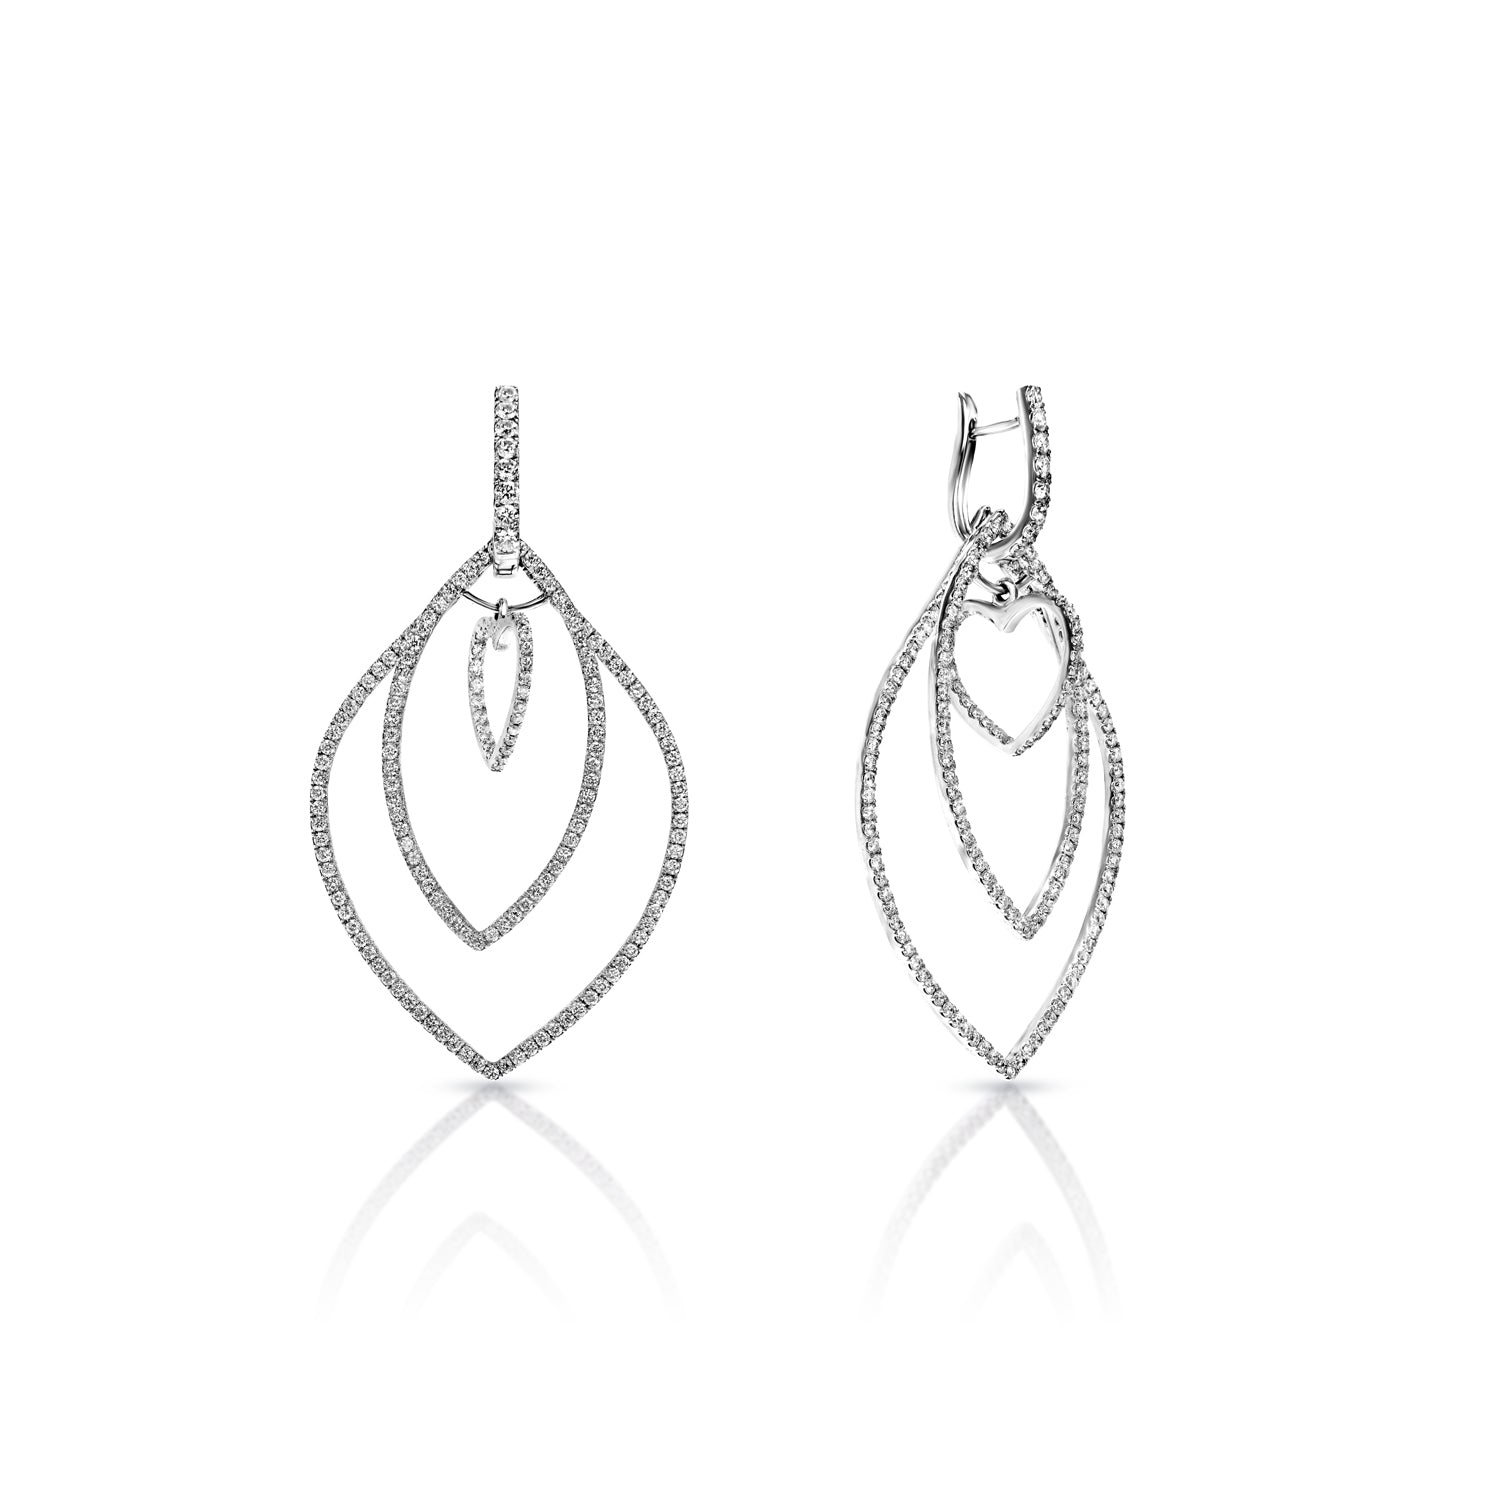 Amina 3 Carat Round Brilliant Diamond Hanging Earrings Front and Side View